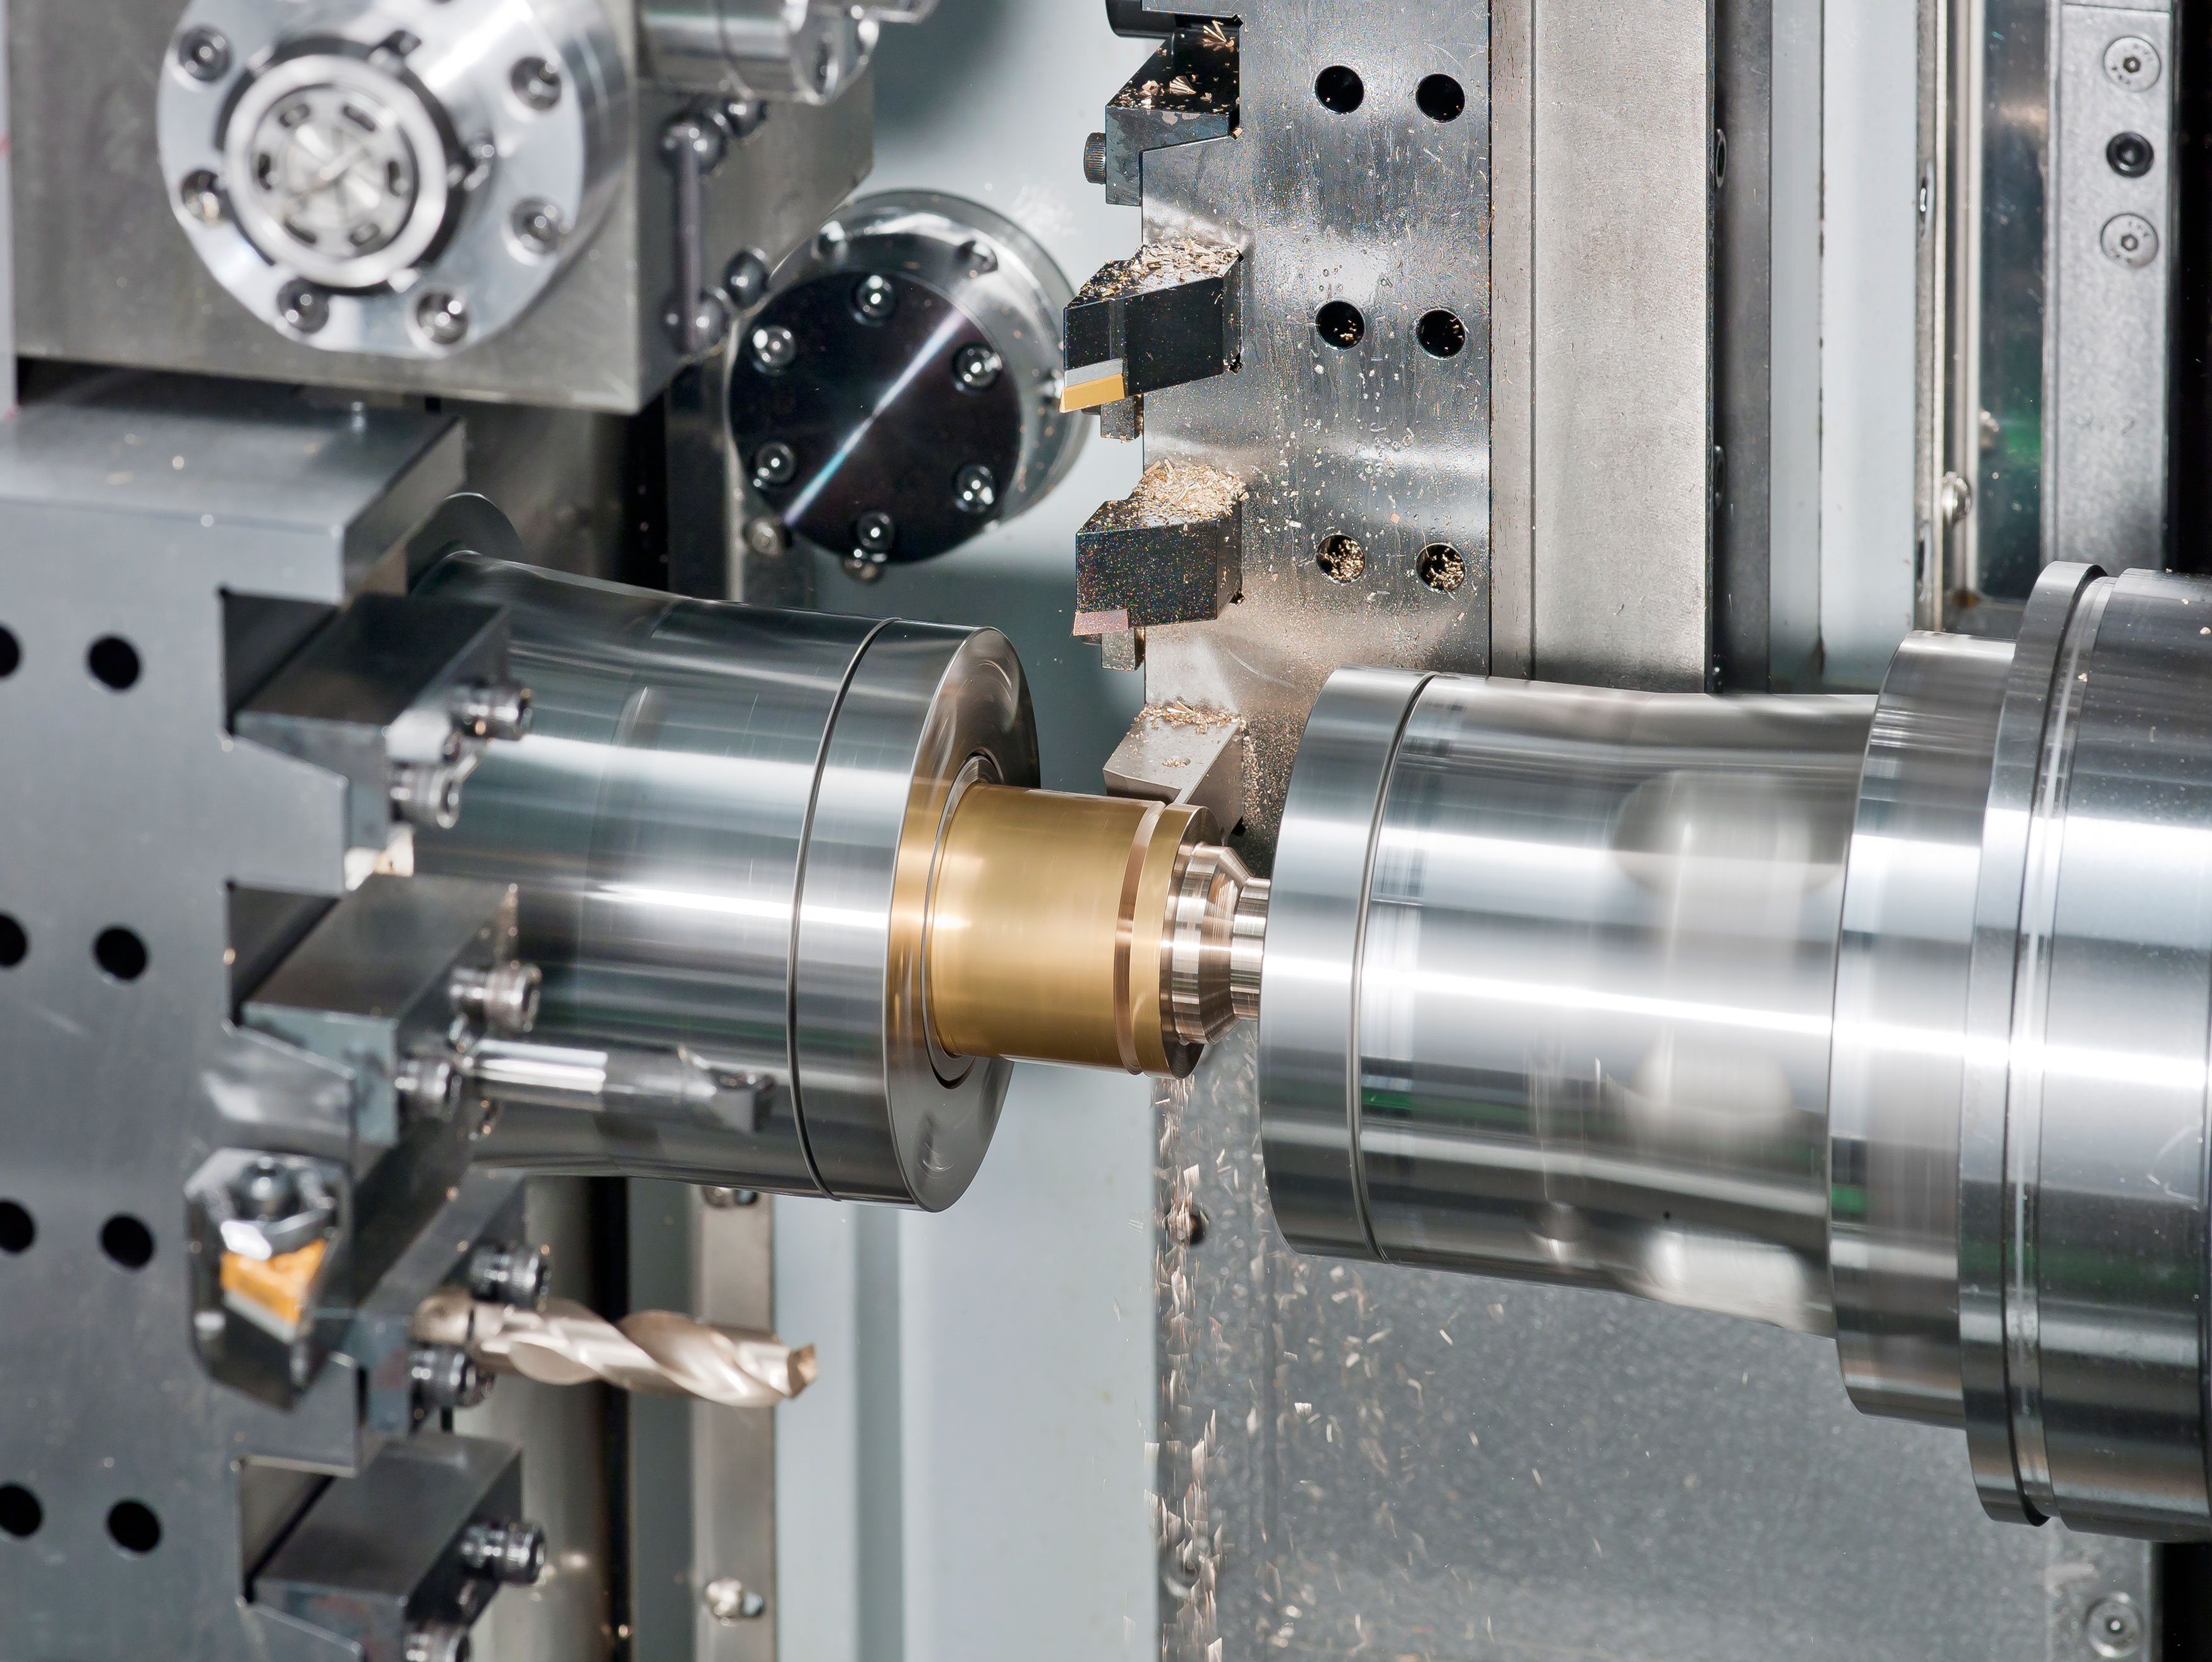 Significance of CNC in the Business Industry